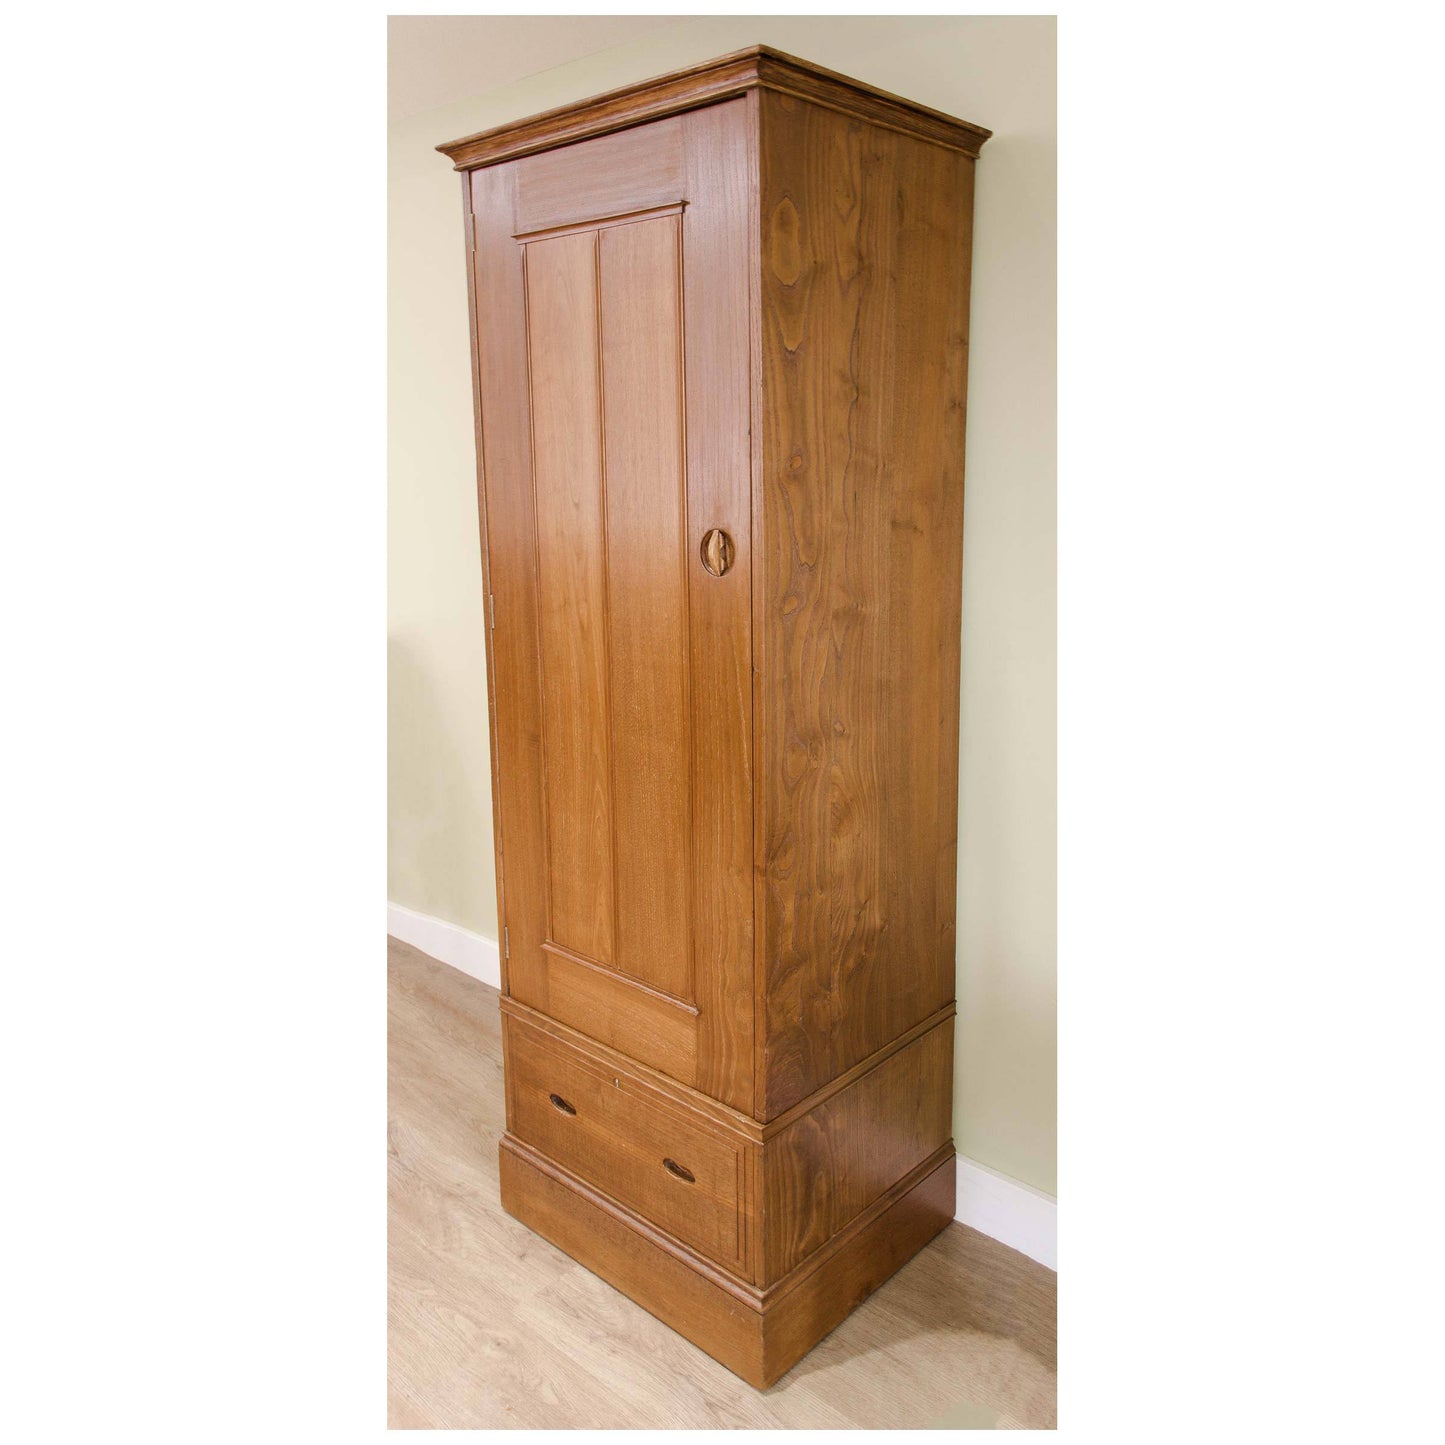 Heal and Co (Ambrose Heal) Ambrose Heal Rare Arts and Crafts Sweet Chestnut Single Door Wardrobe C. 1905